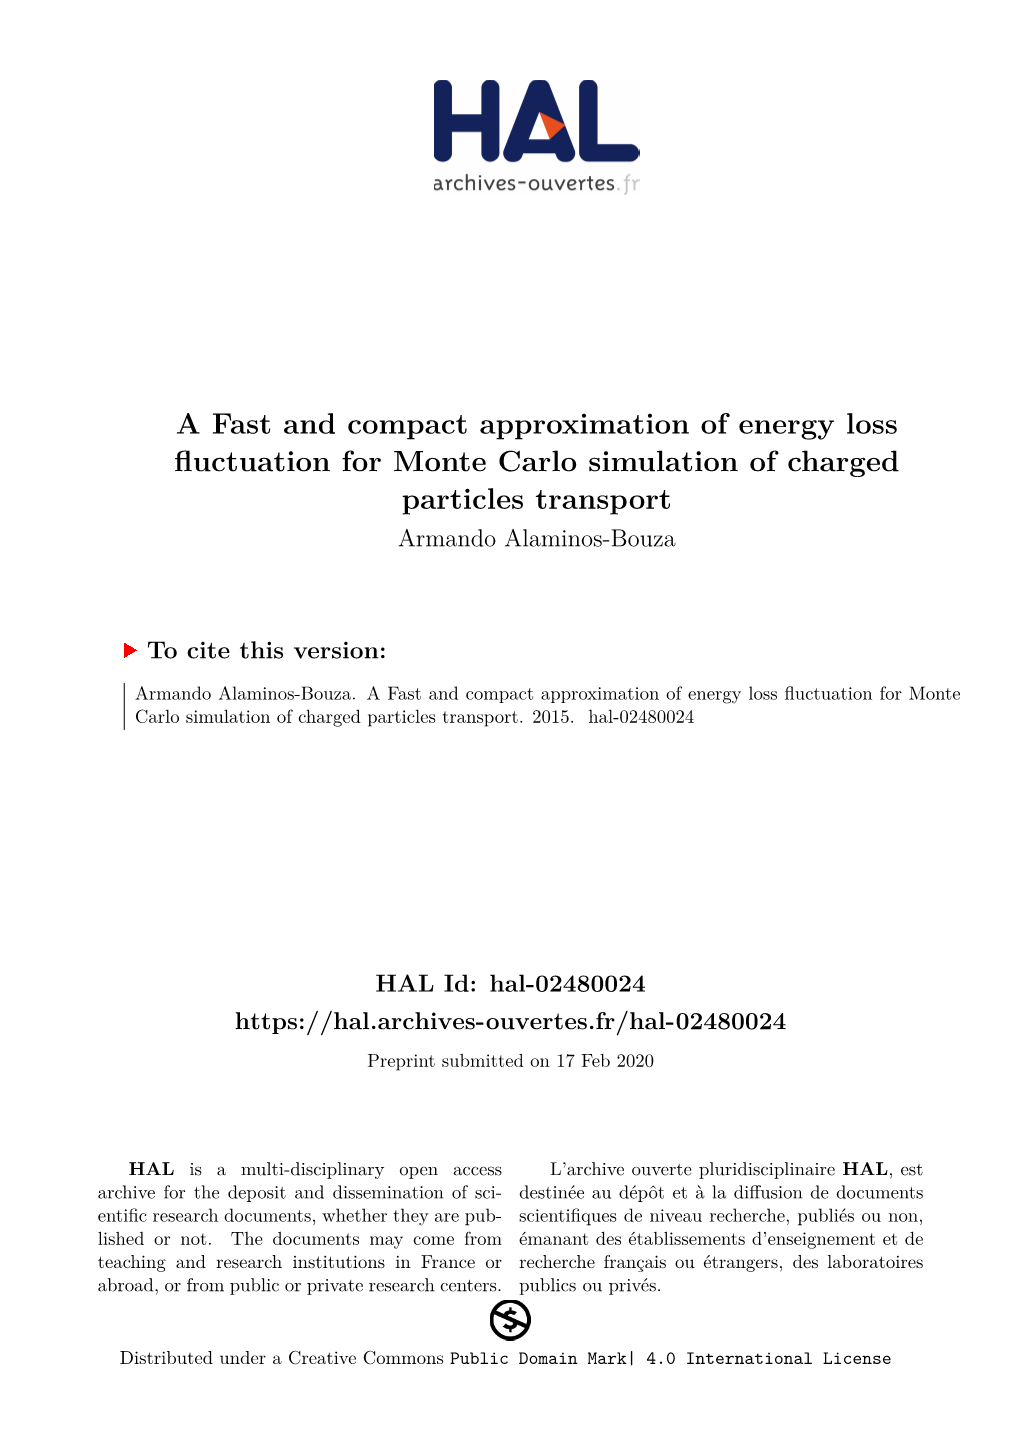 A Fast and Compact Approximation of Energy Loss Fluctuation for Monte Carlo Simulation of Charged Particles Transport Armando Alaminos-Bouza